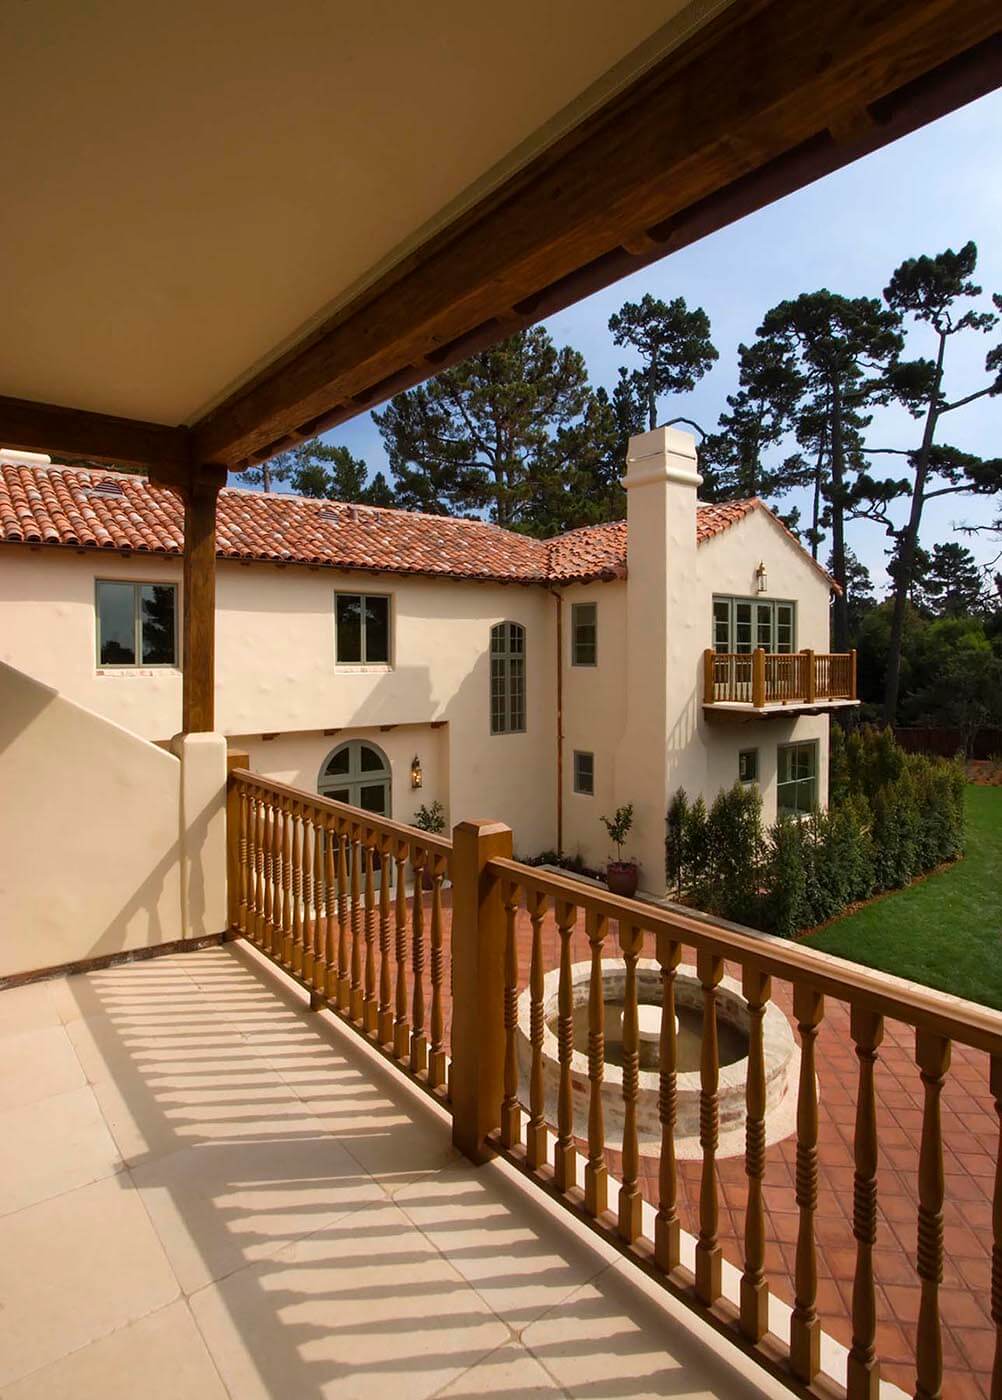 Exterior of a SPANISH STYLE CALIFORNIA LUXURY HOME with large red tiled PATIO as seen from upstairs deck. Architecture photography by Eagle Visions Photography